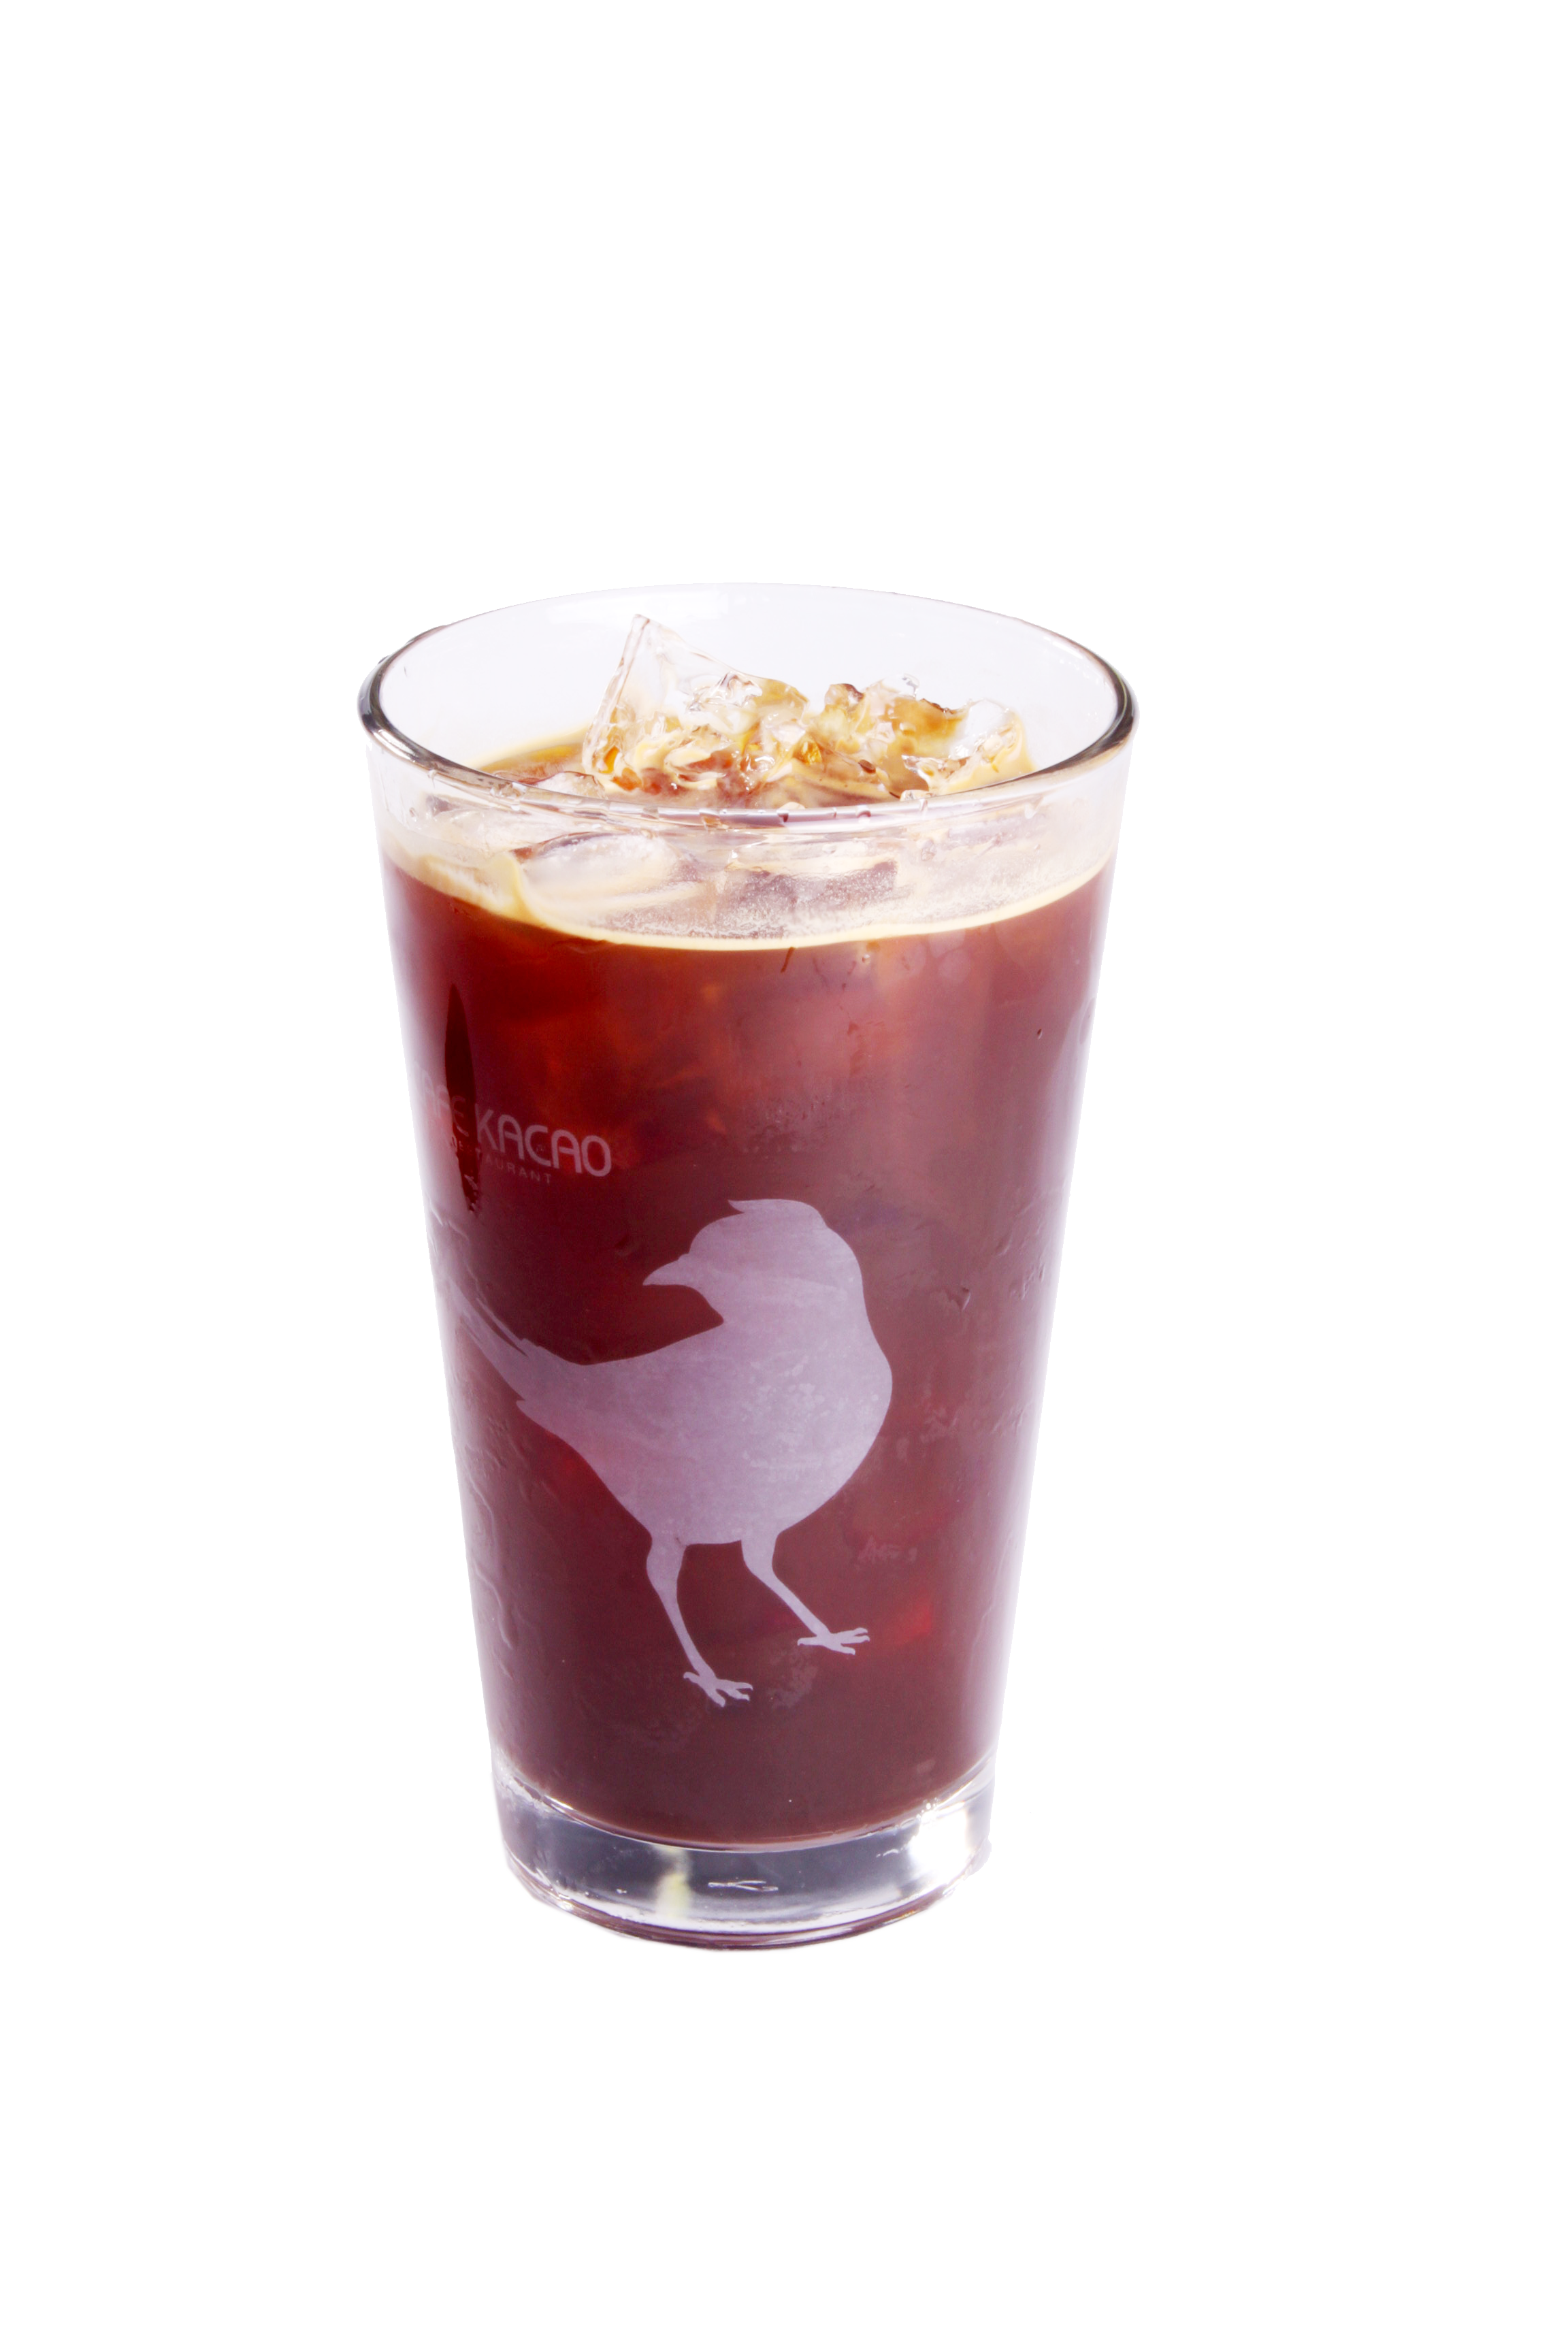 Coffee Coffea Iced Smoothie Shanghai Latte Robusta PNG Image